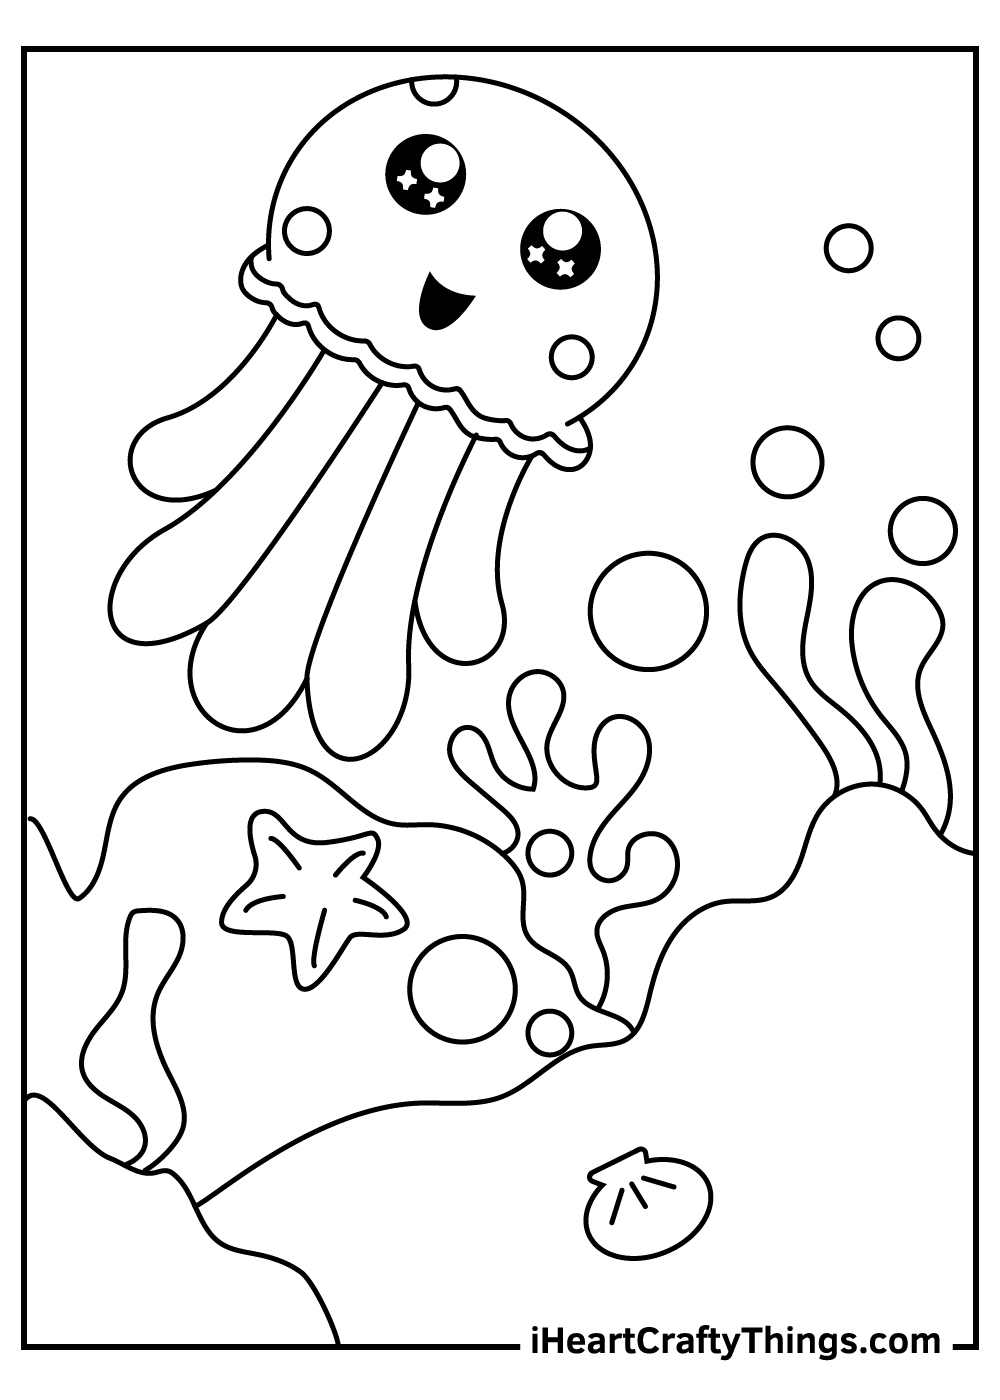 Jellyfish coloring pages free printables